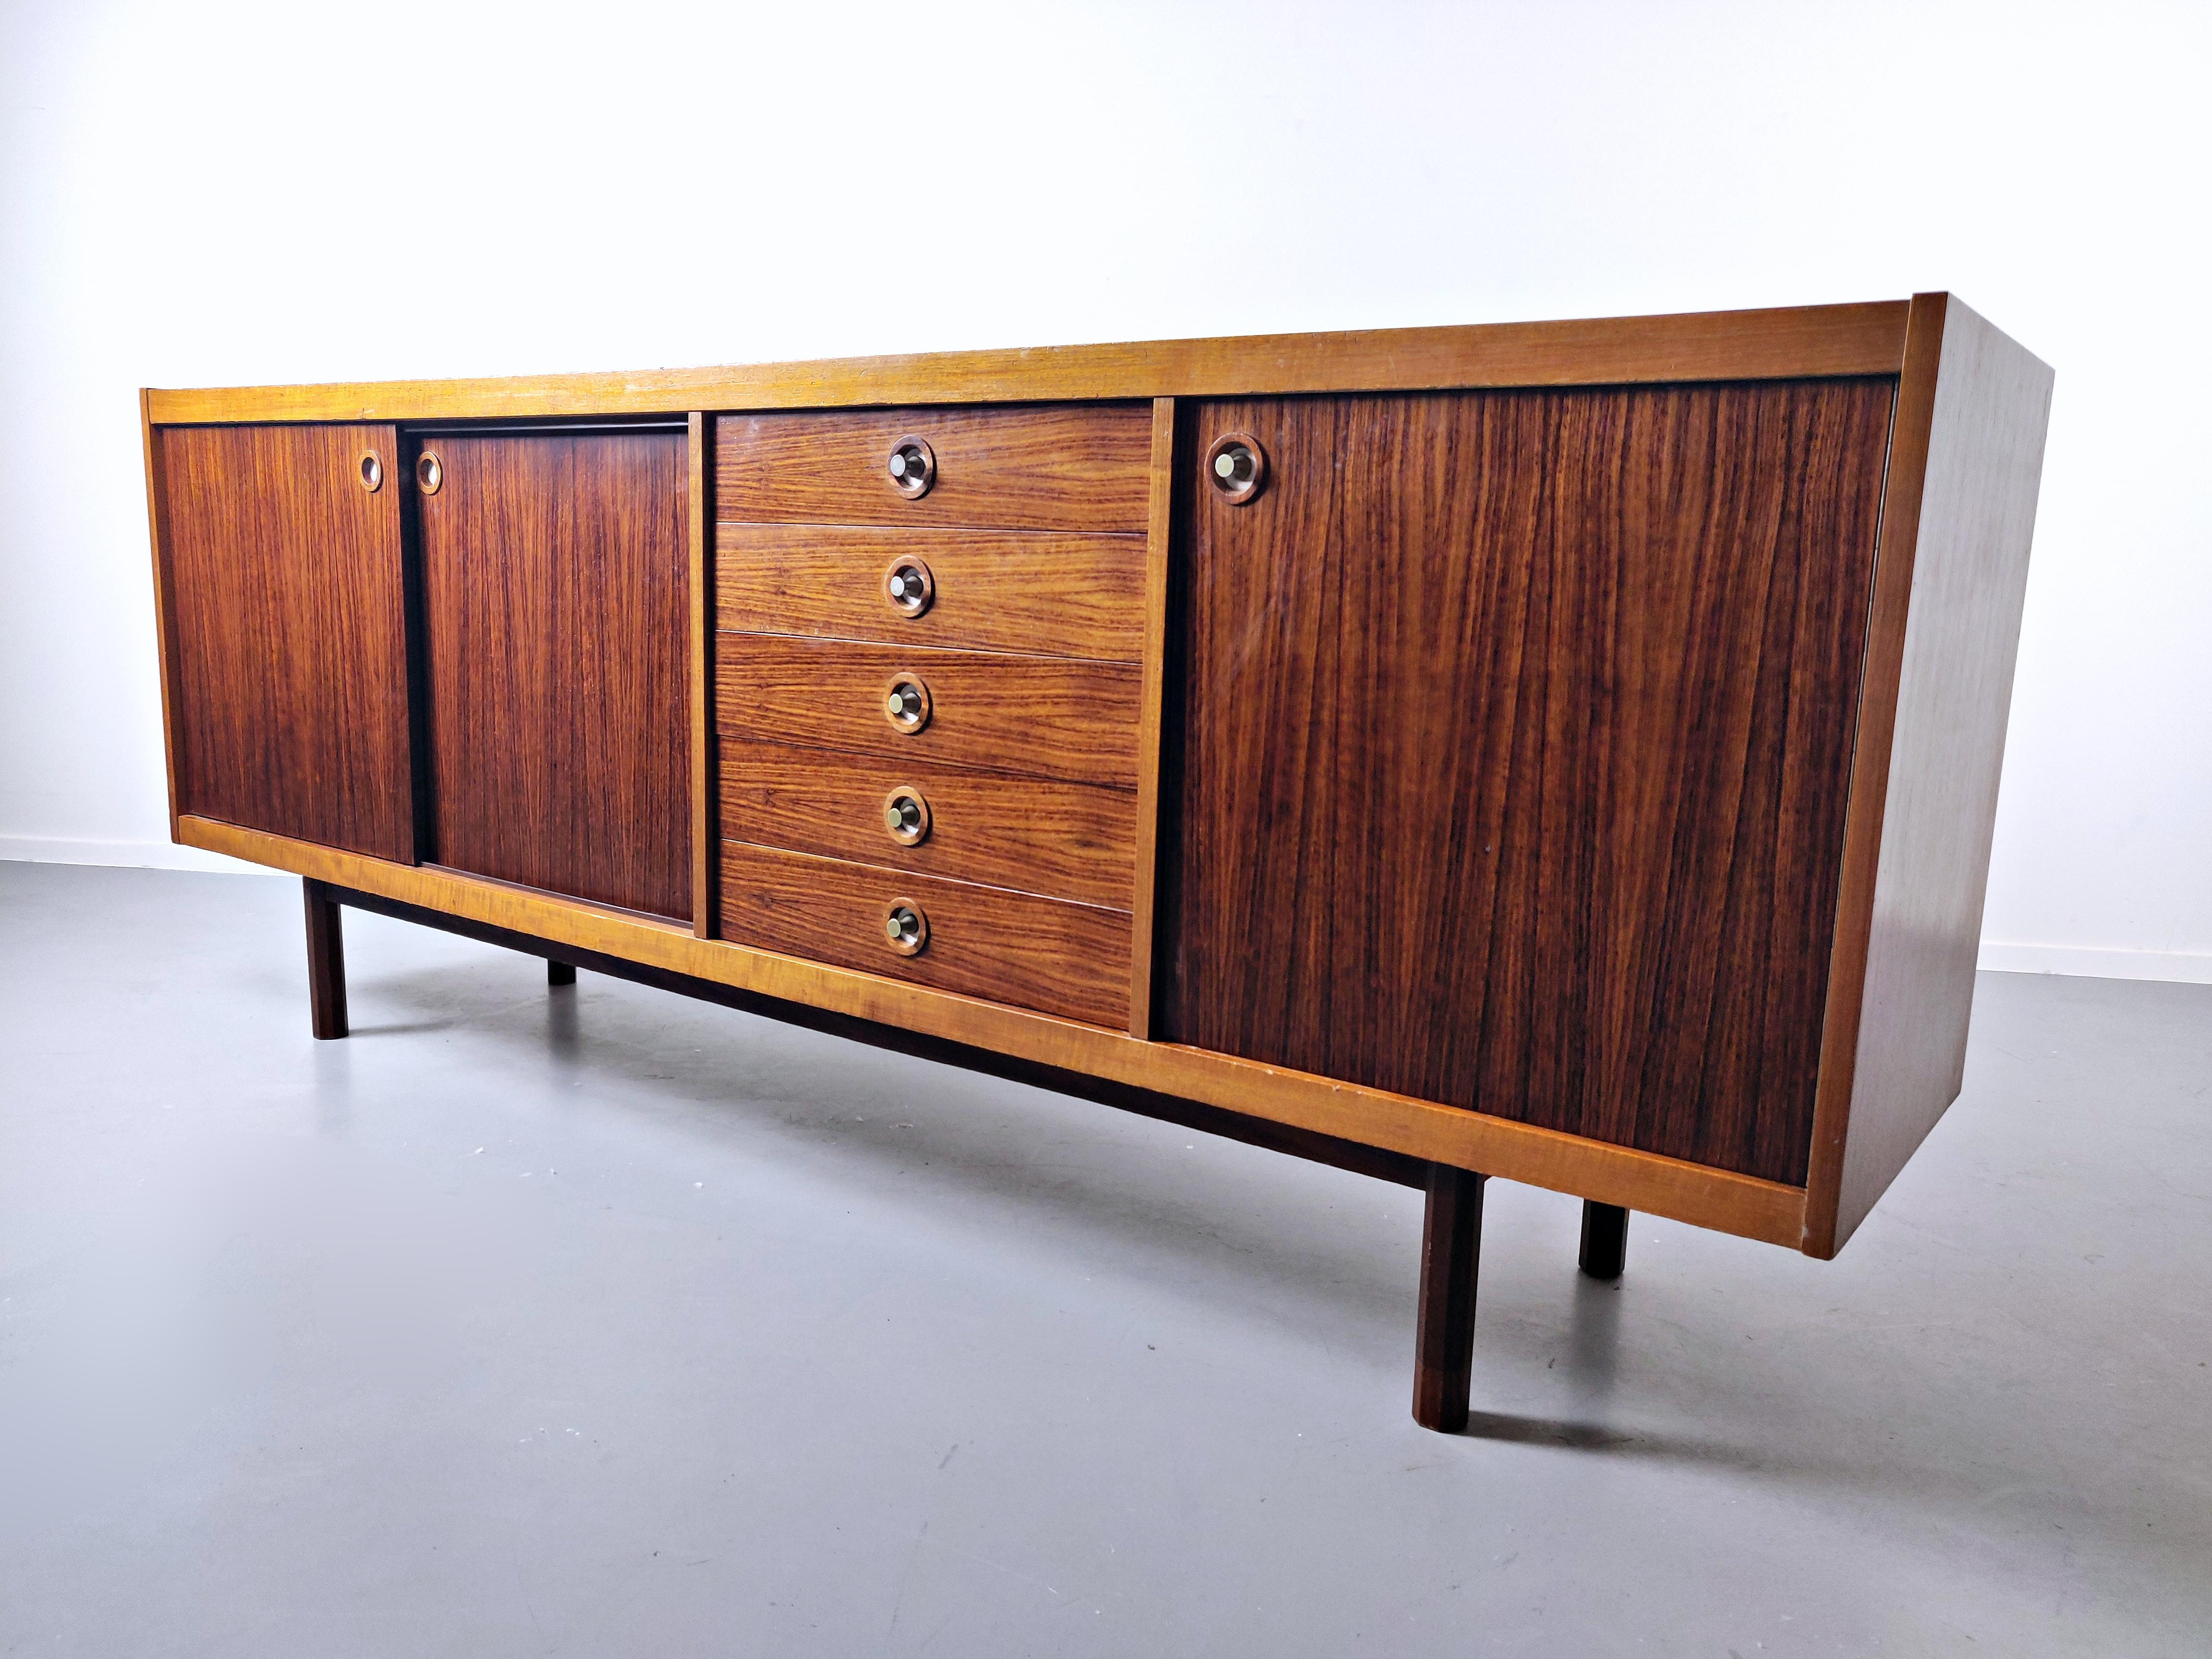 Georges Coslin Mid-Century Modern Wooden Sideboard, 1950s For Sale 2